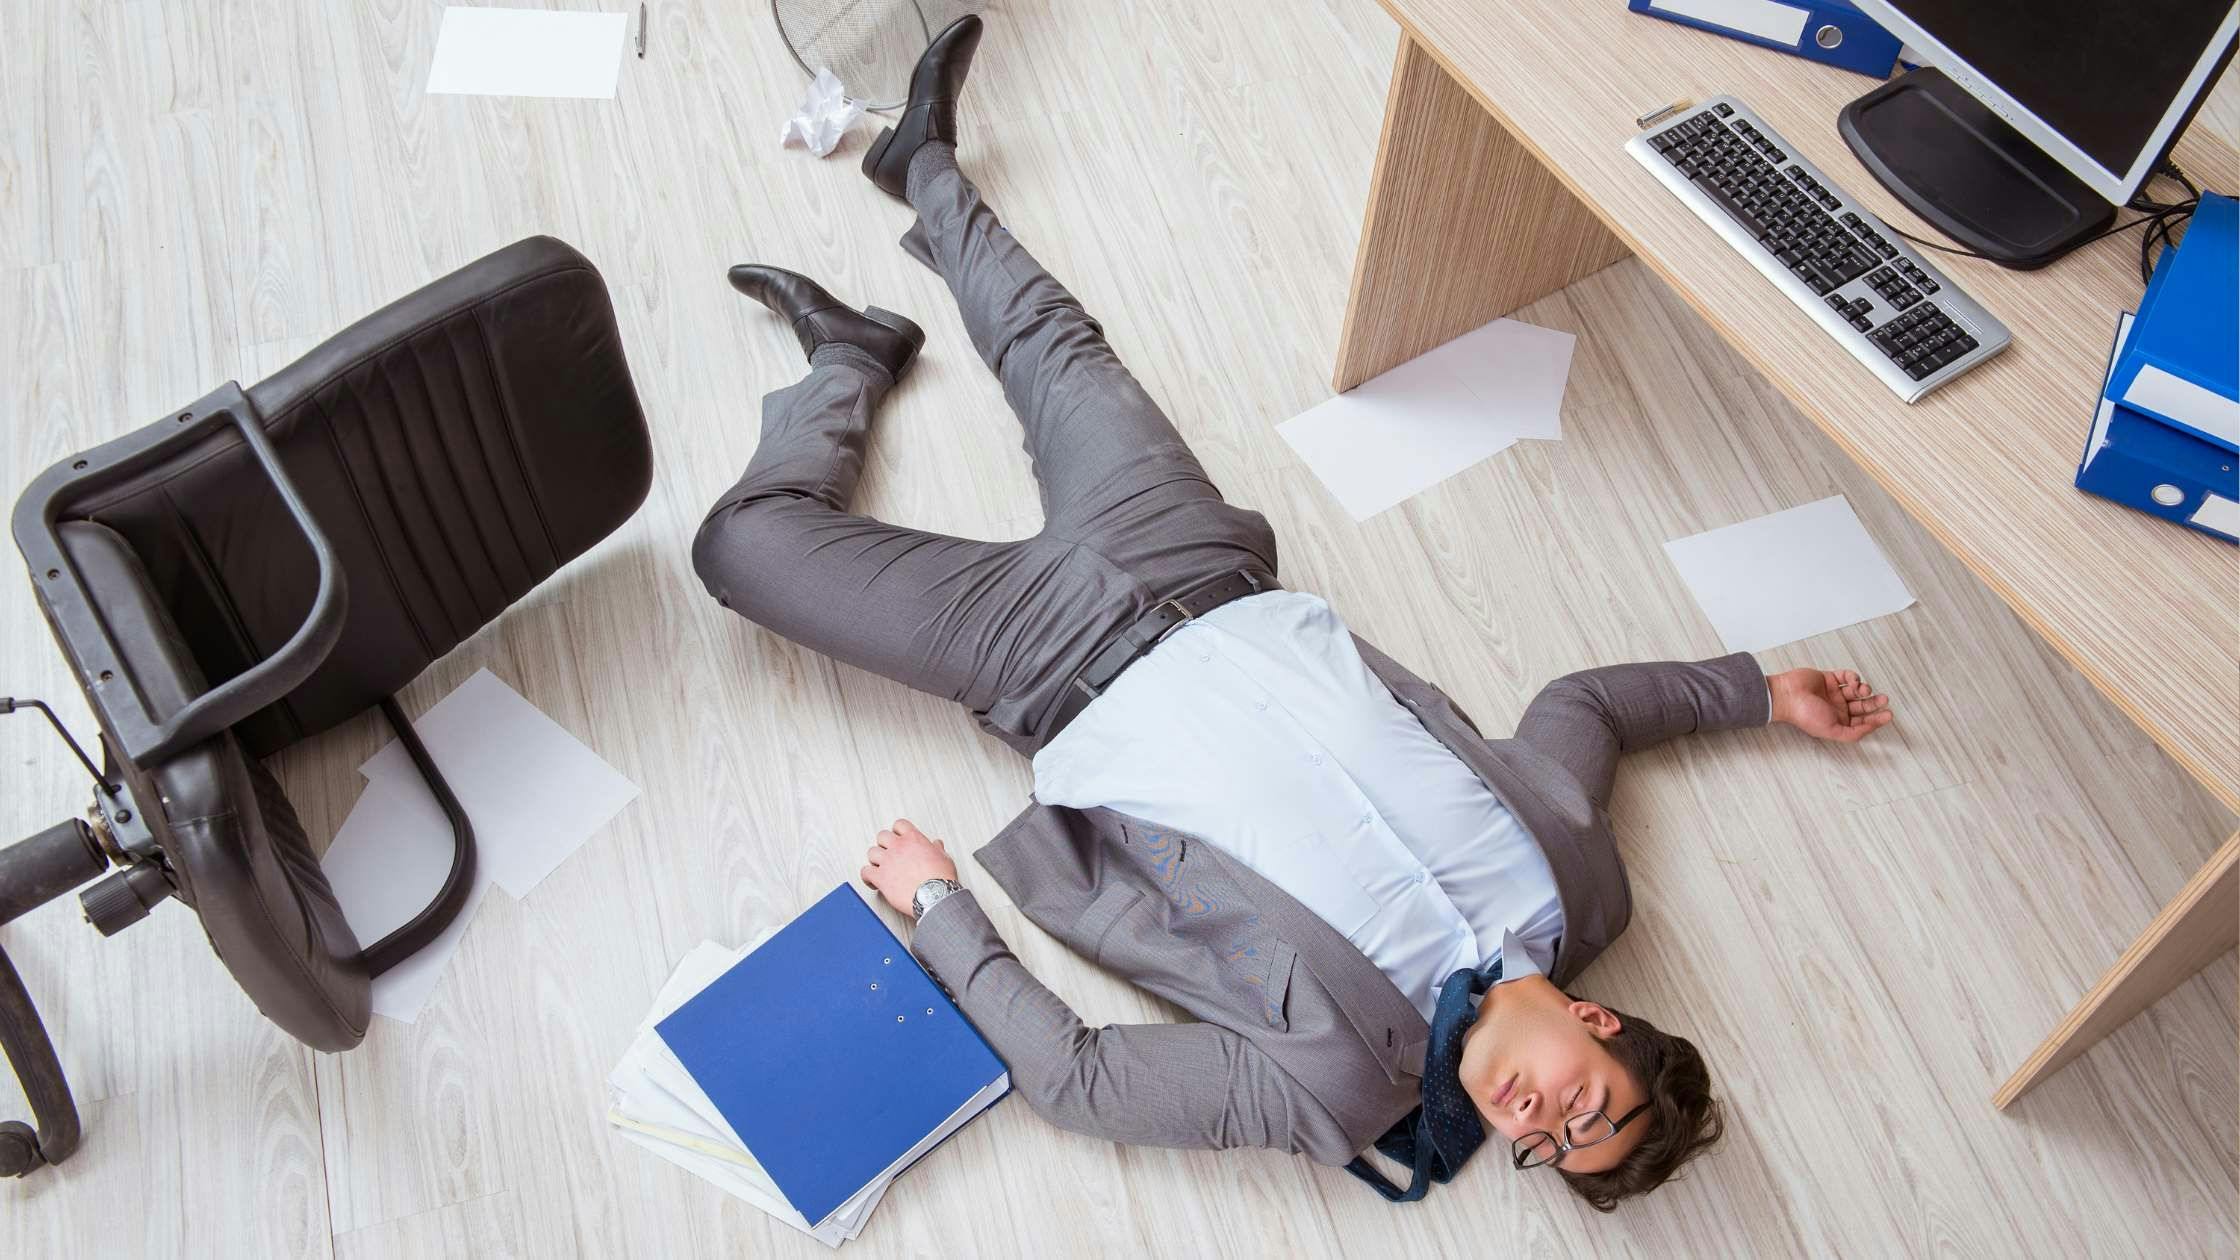 a man is fainted and laying on the floor in an office .